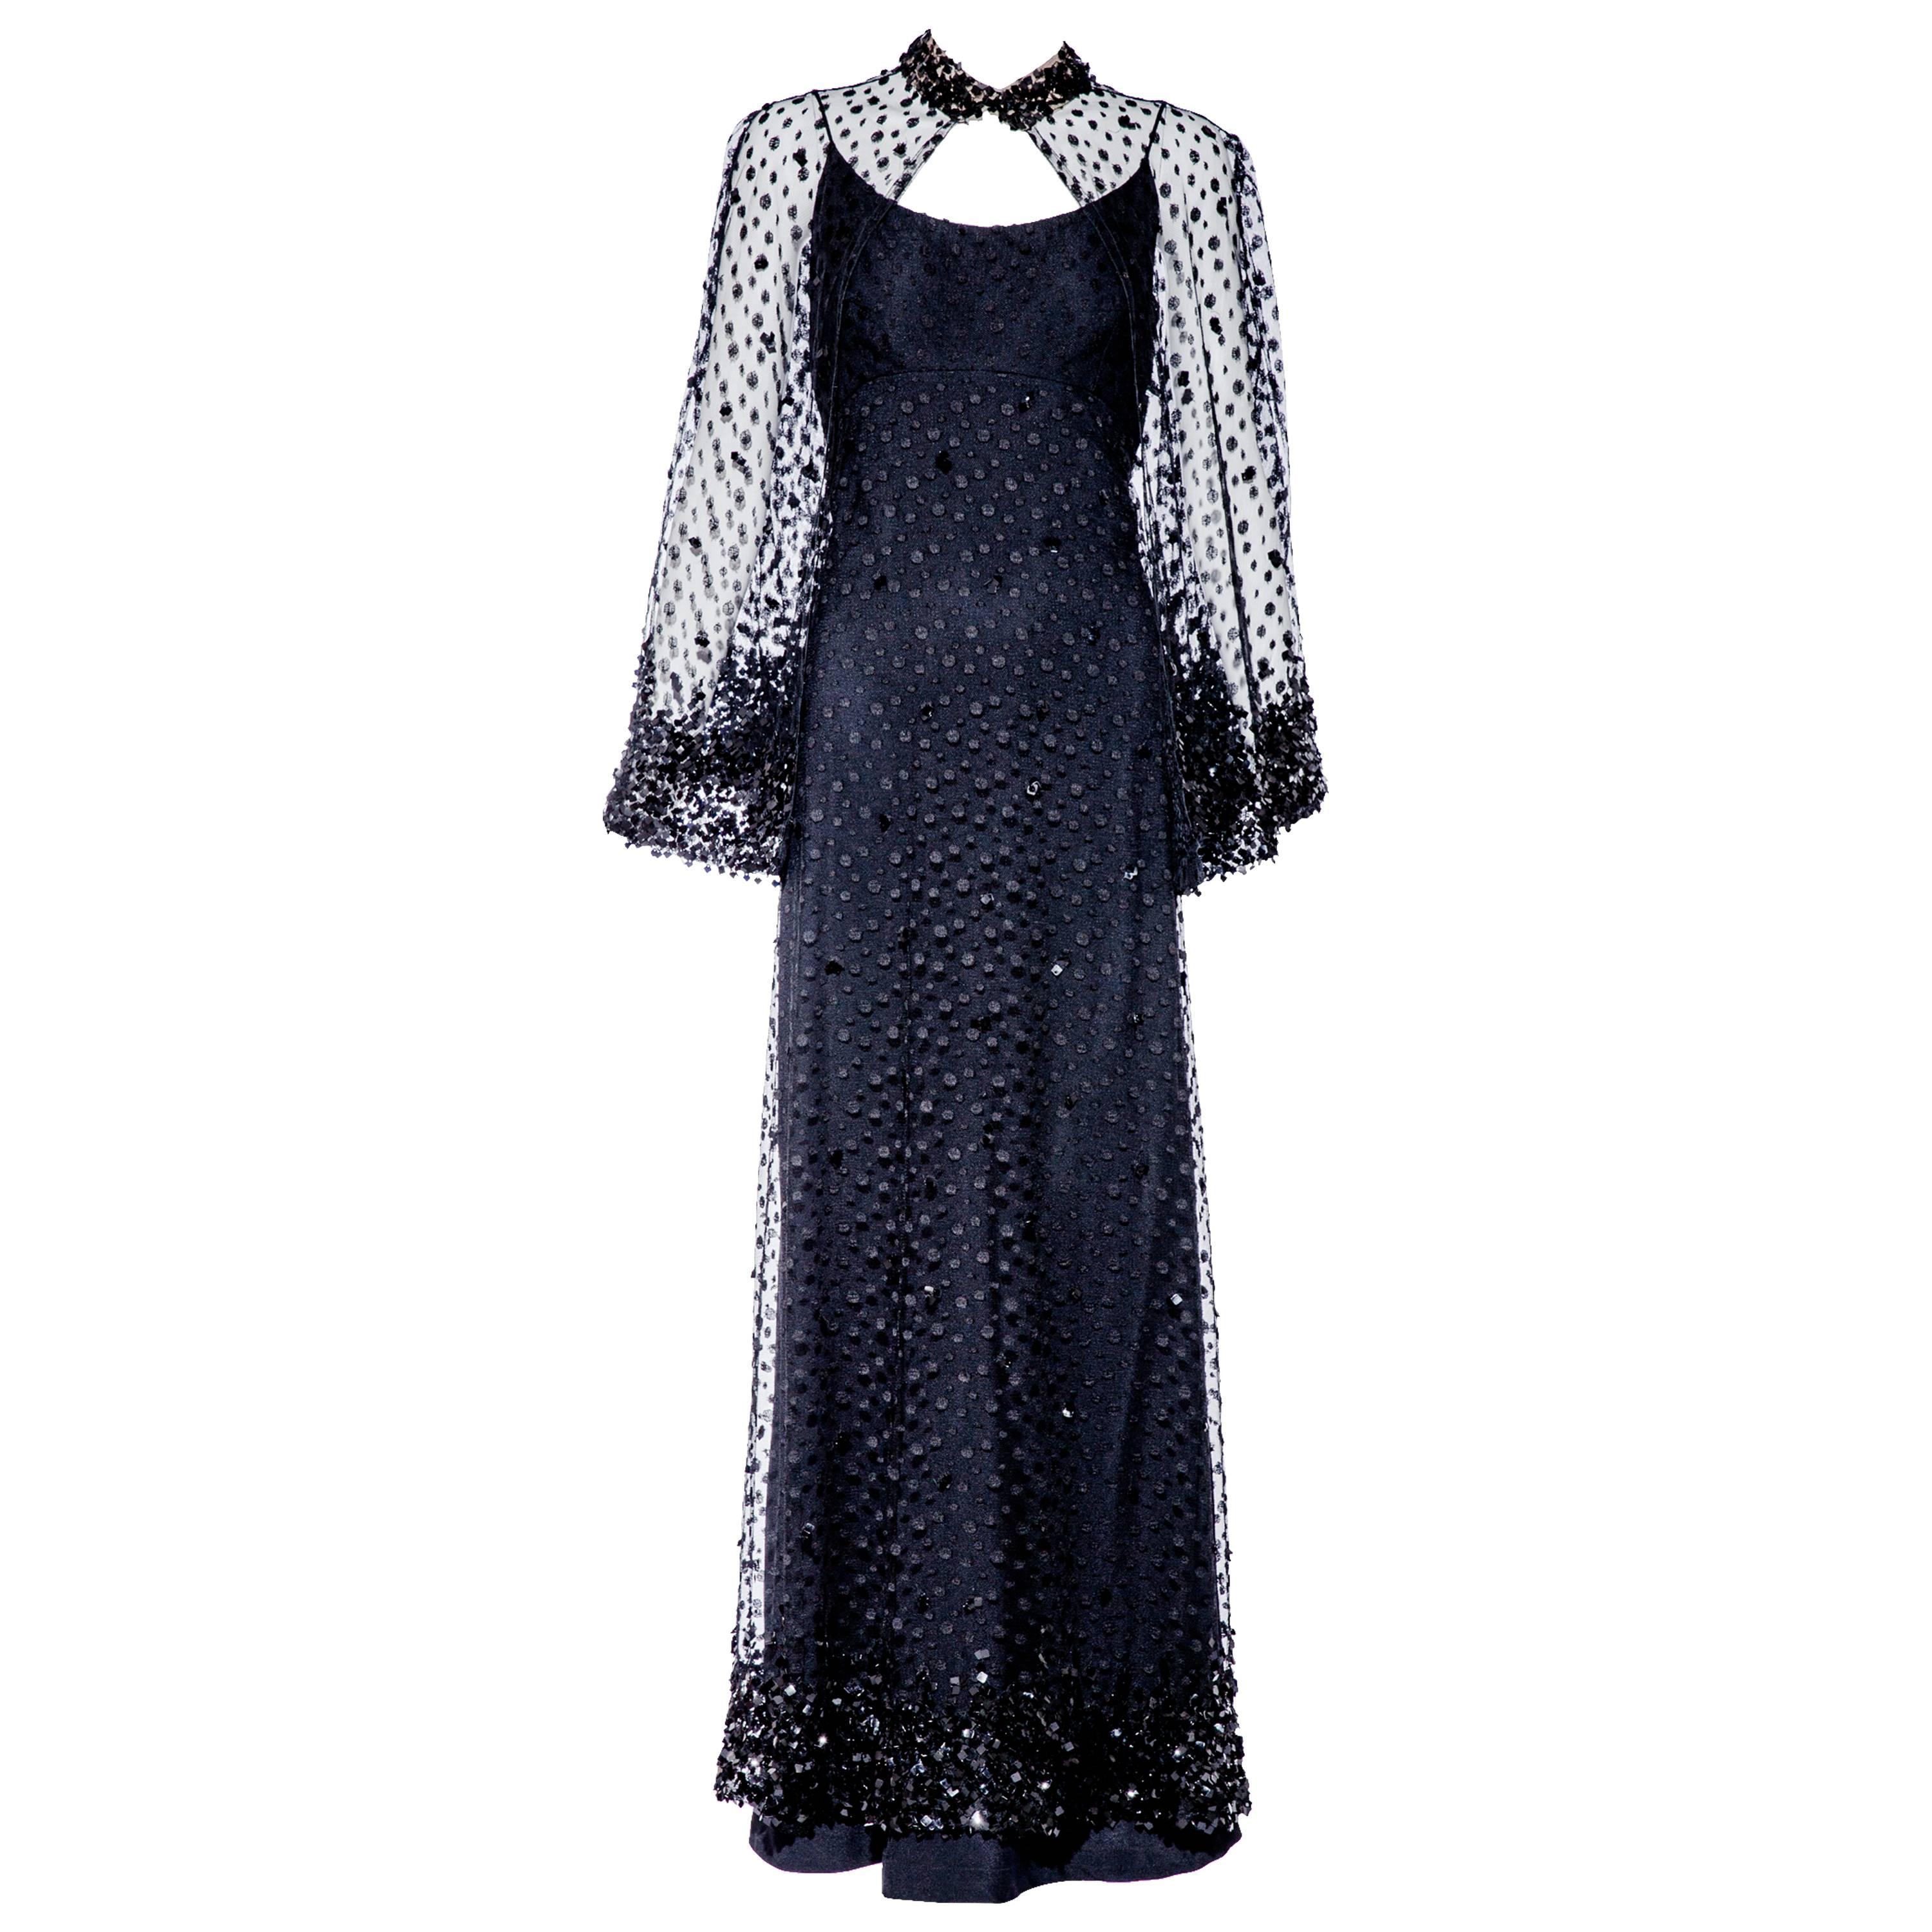 1970s Alfred Bosand black lace gown with capelet